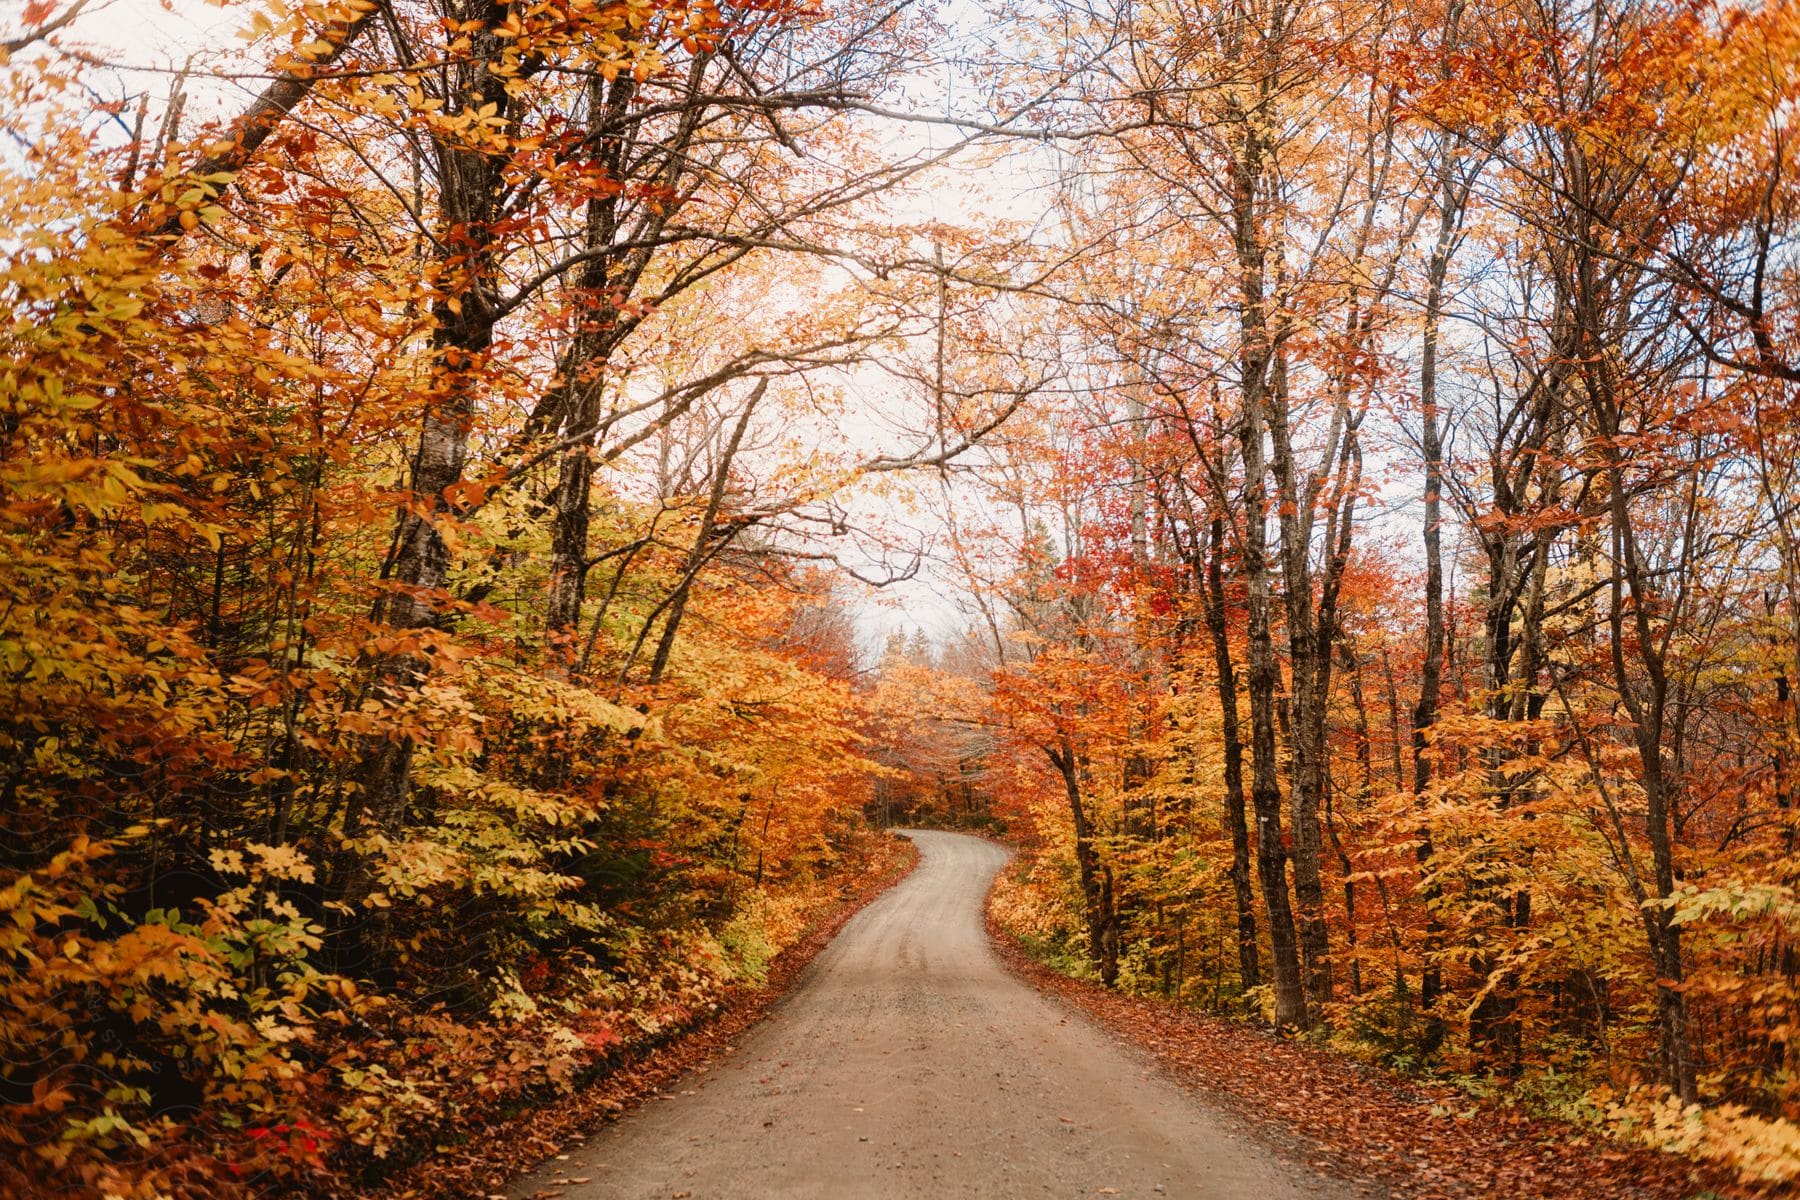 A winding dirt road cuts through a colorful forest of orange and yellow leaves.